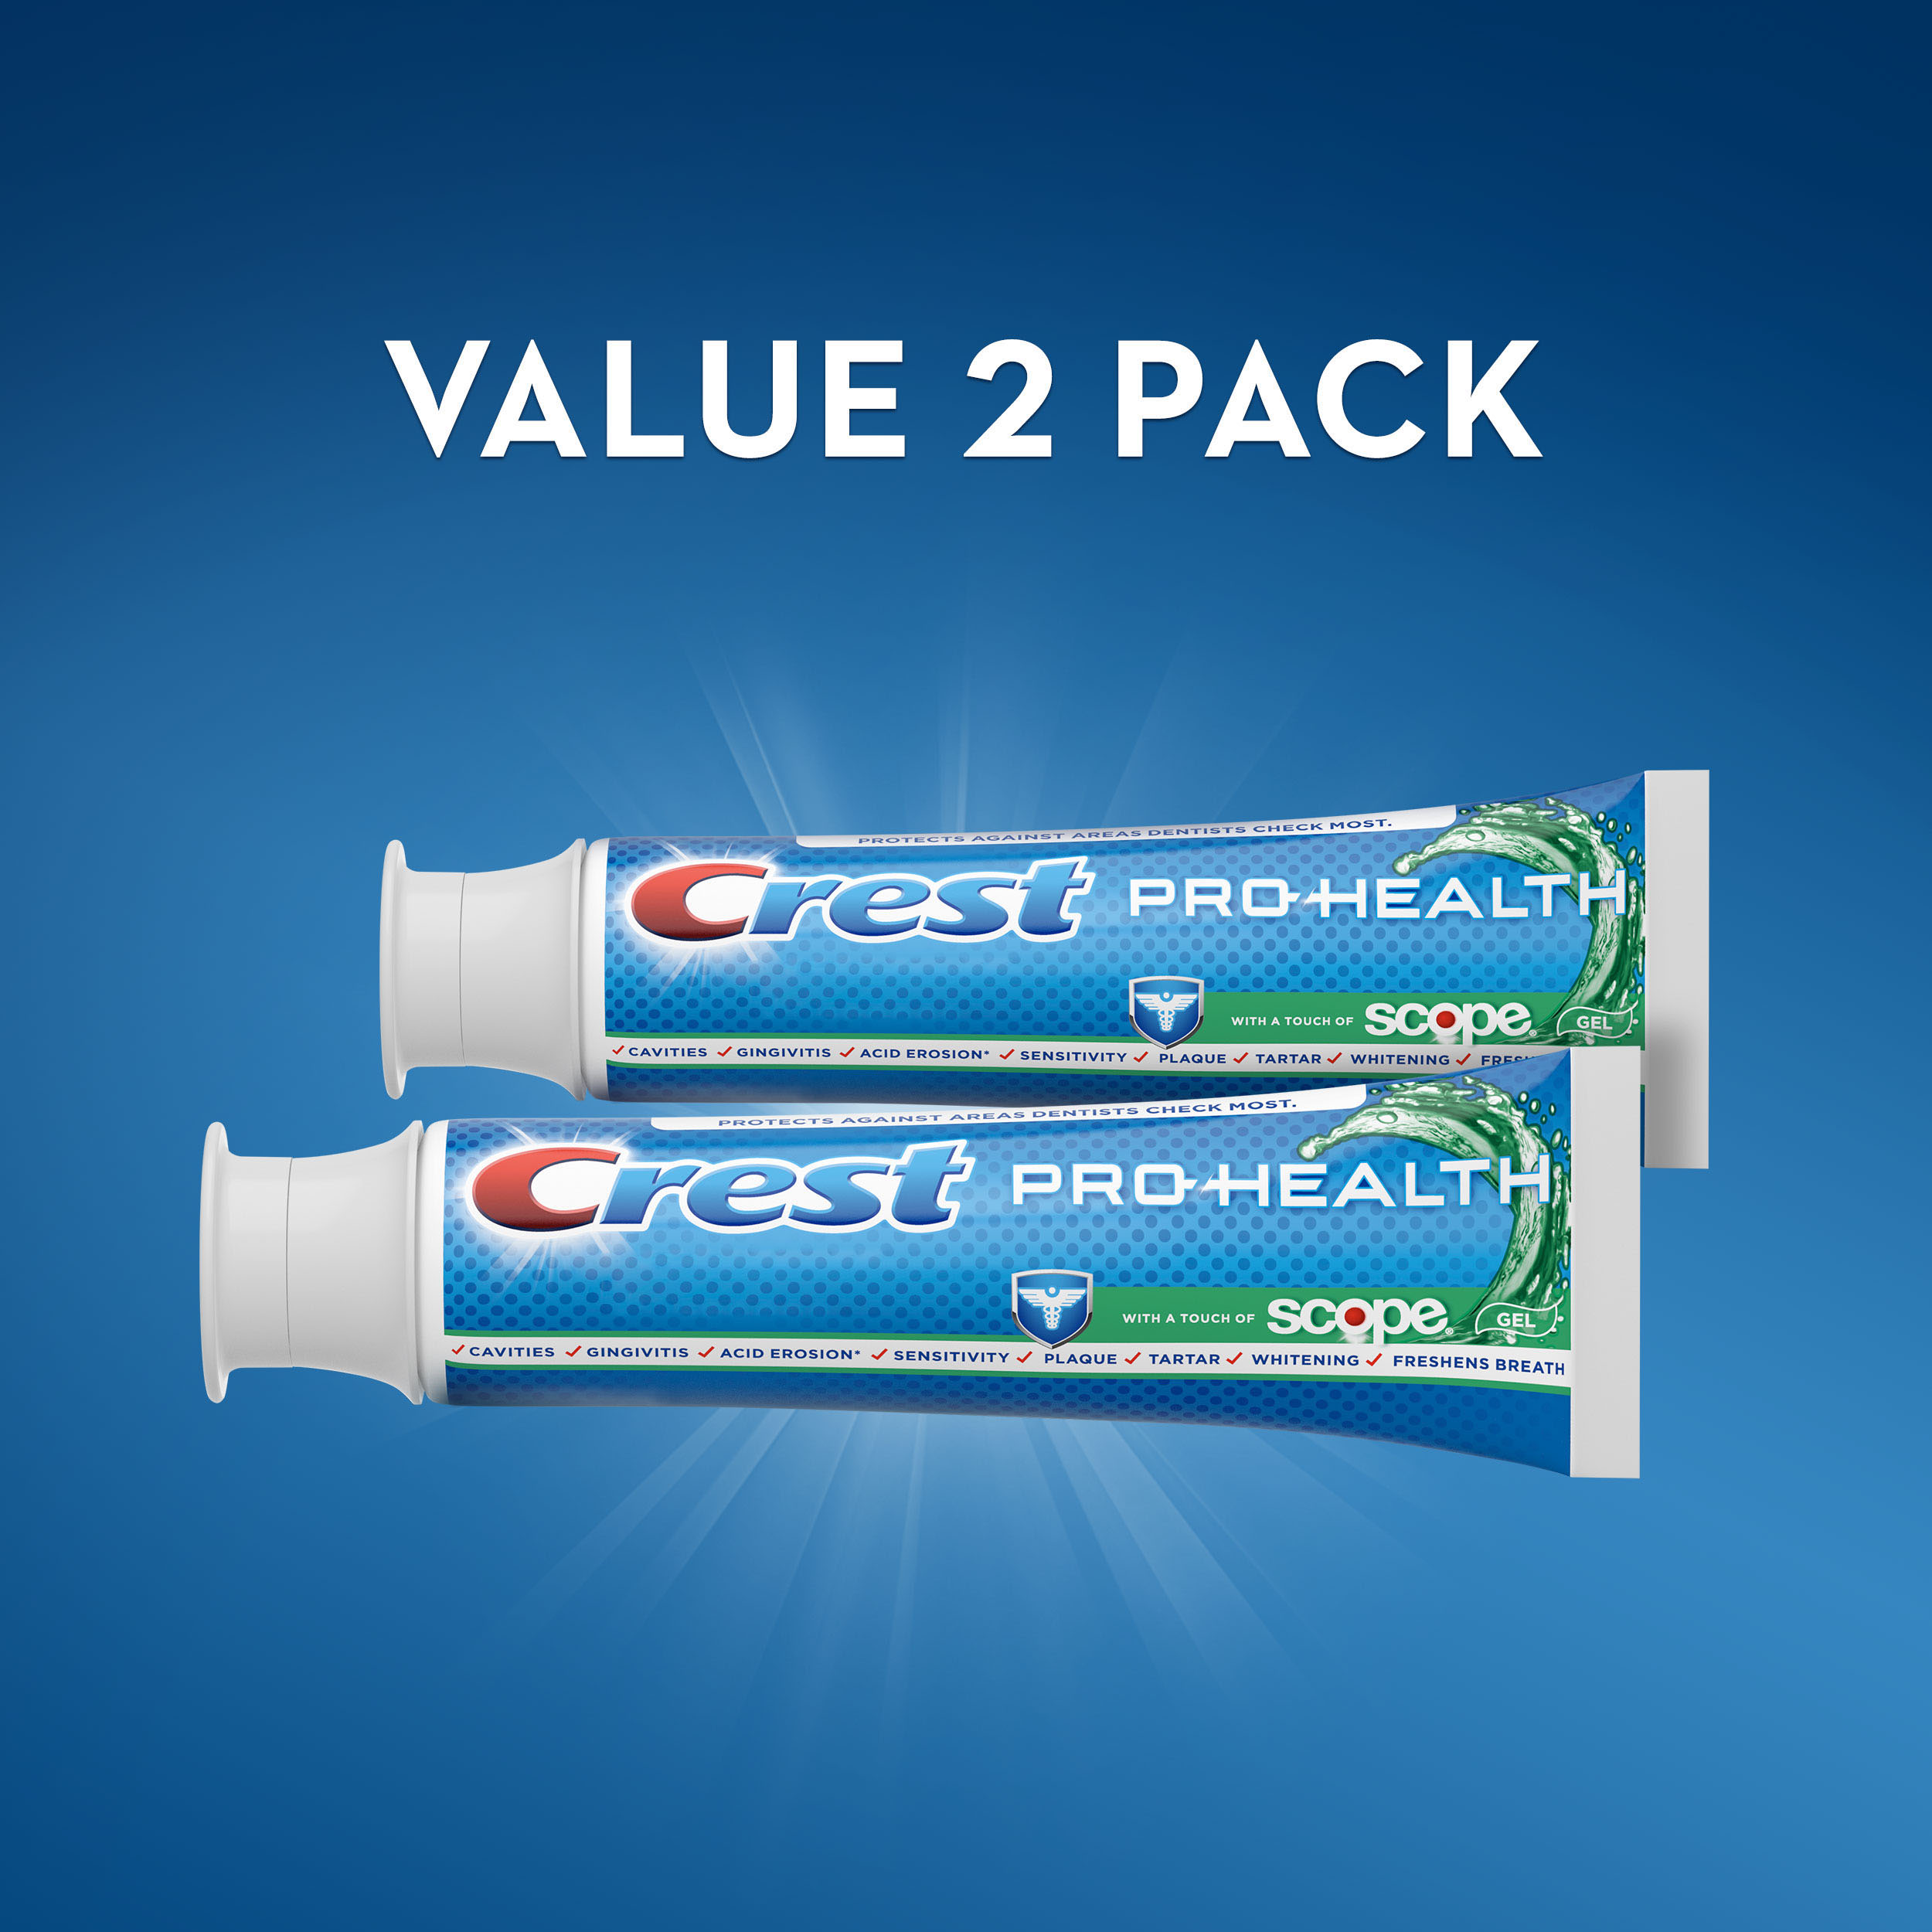 Crest Pro-Health with a Touch of Scope Whitening Toothpaste, 4.6 Oz (2 Pack) - image 3 of 9